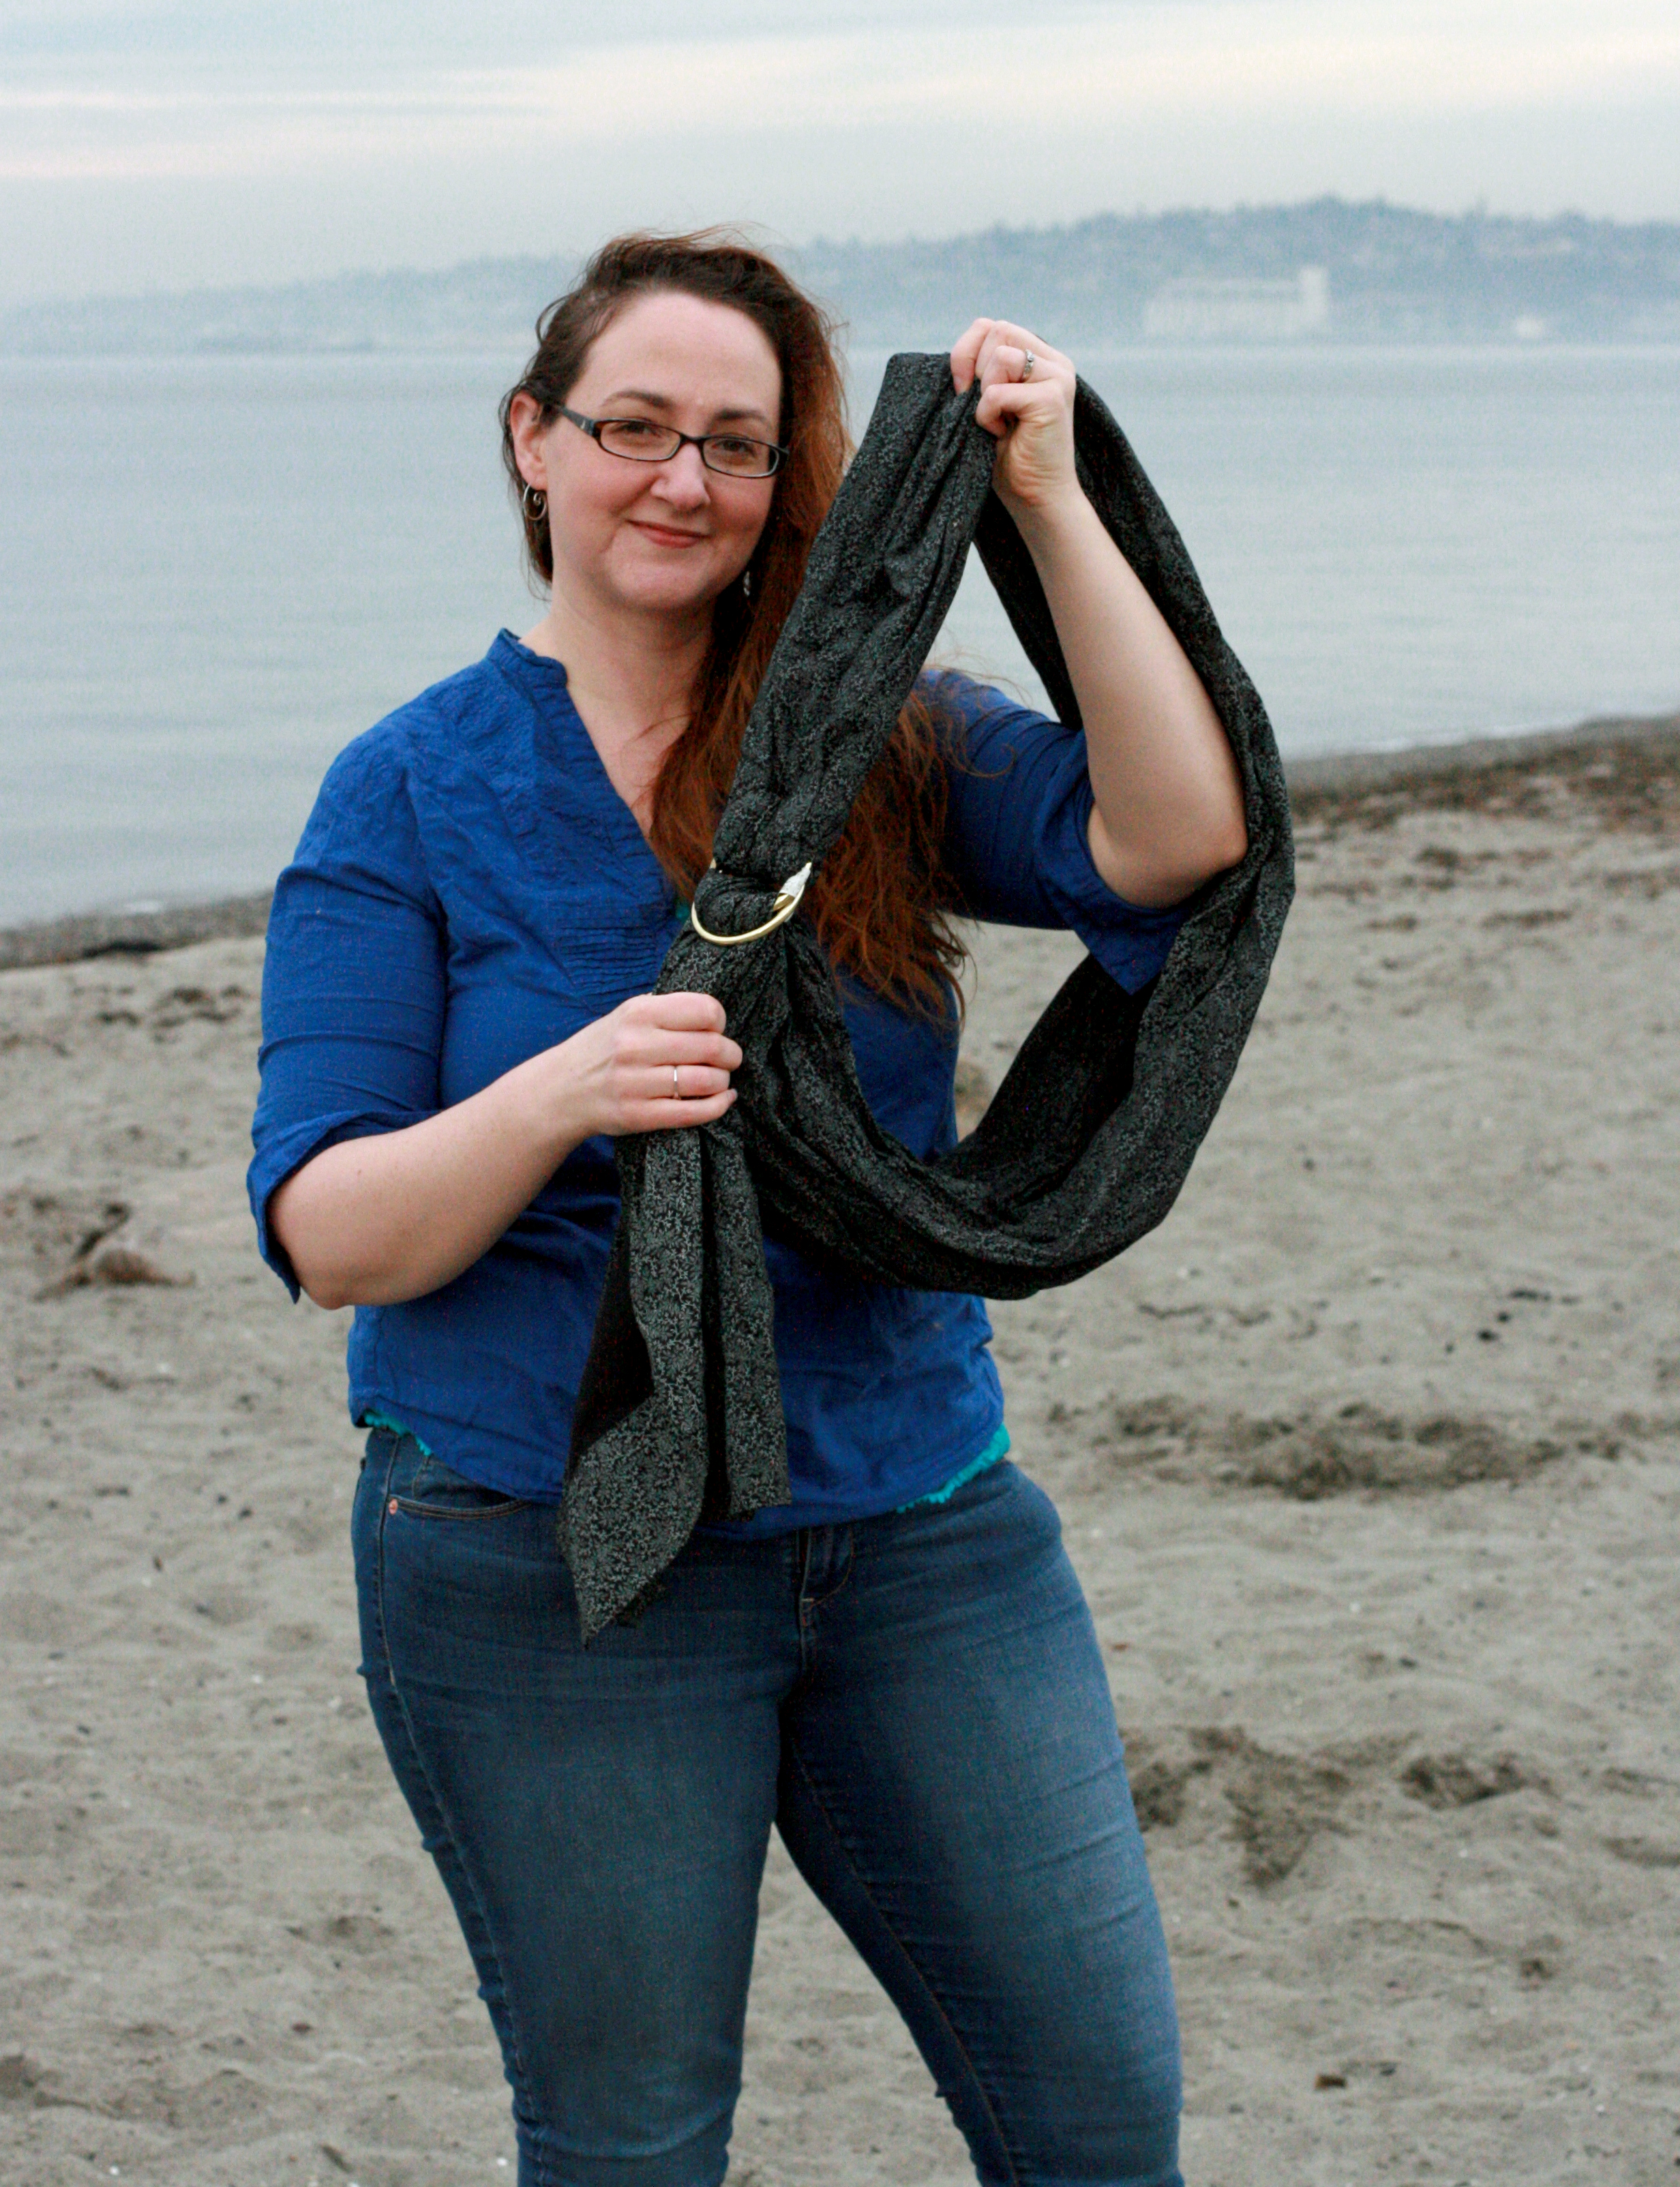 How to use a ring sling